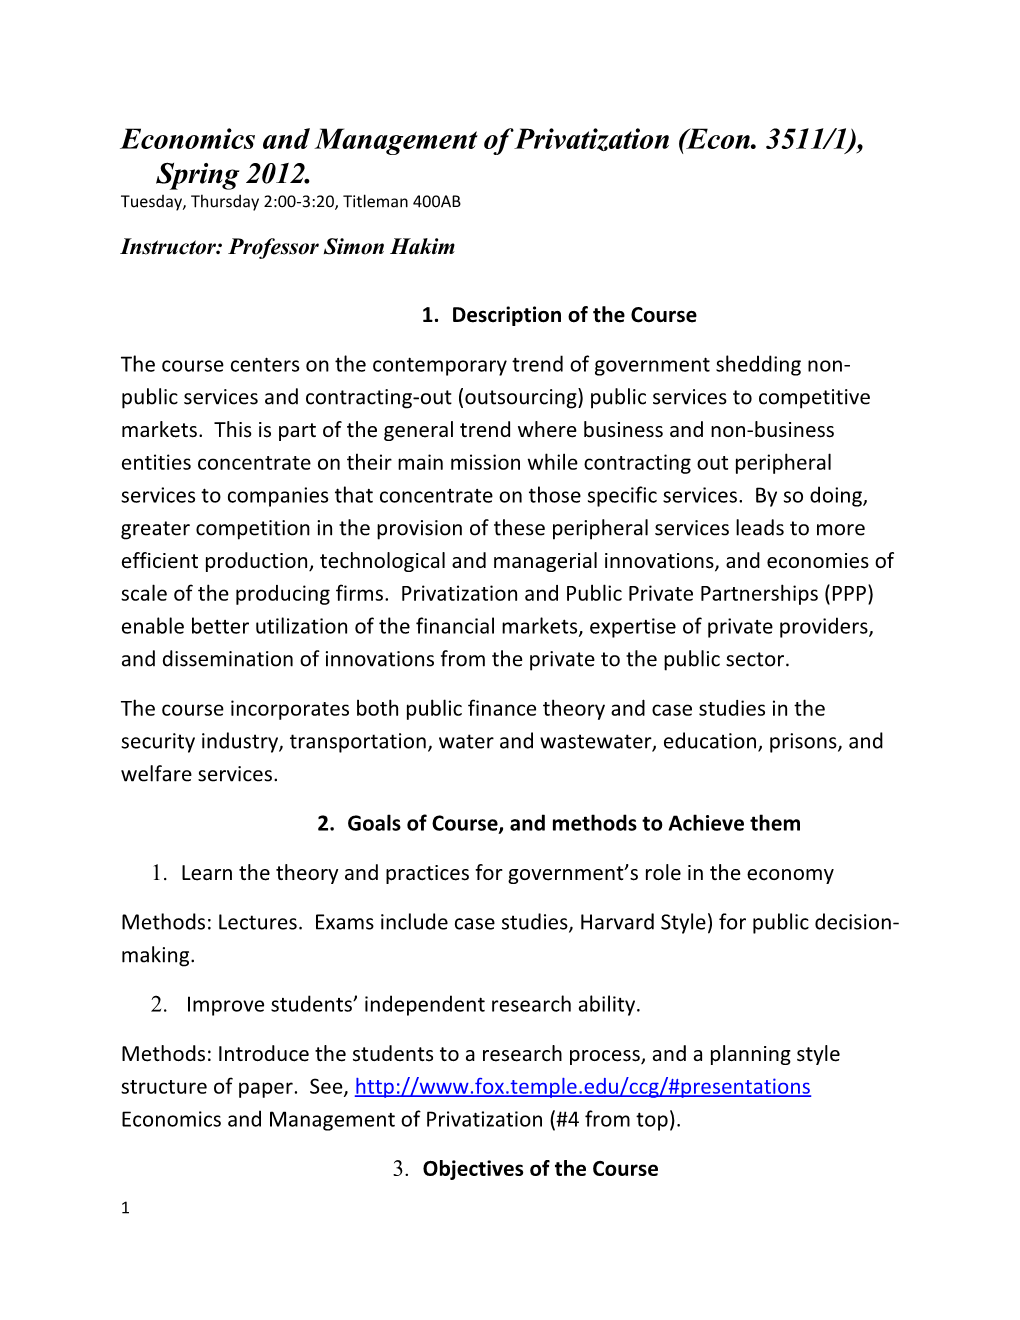 Economics and Management of Privatization (Econ. 3511/1), Spring 2012